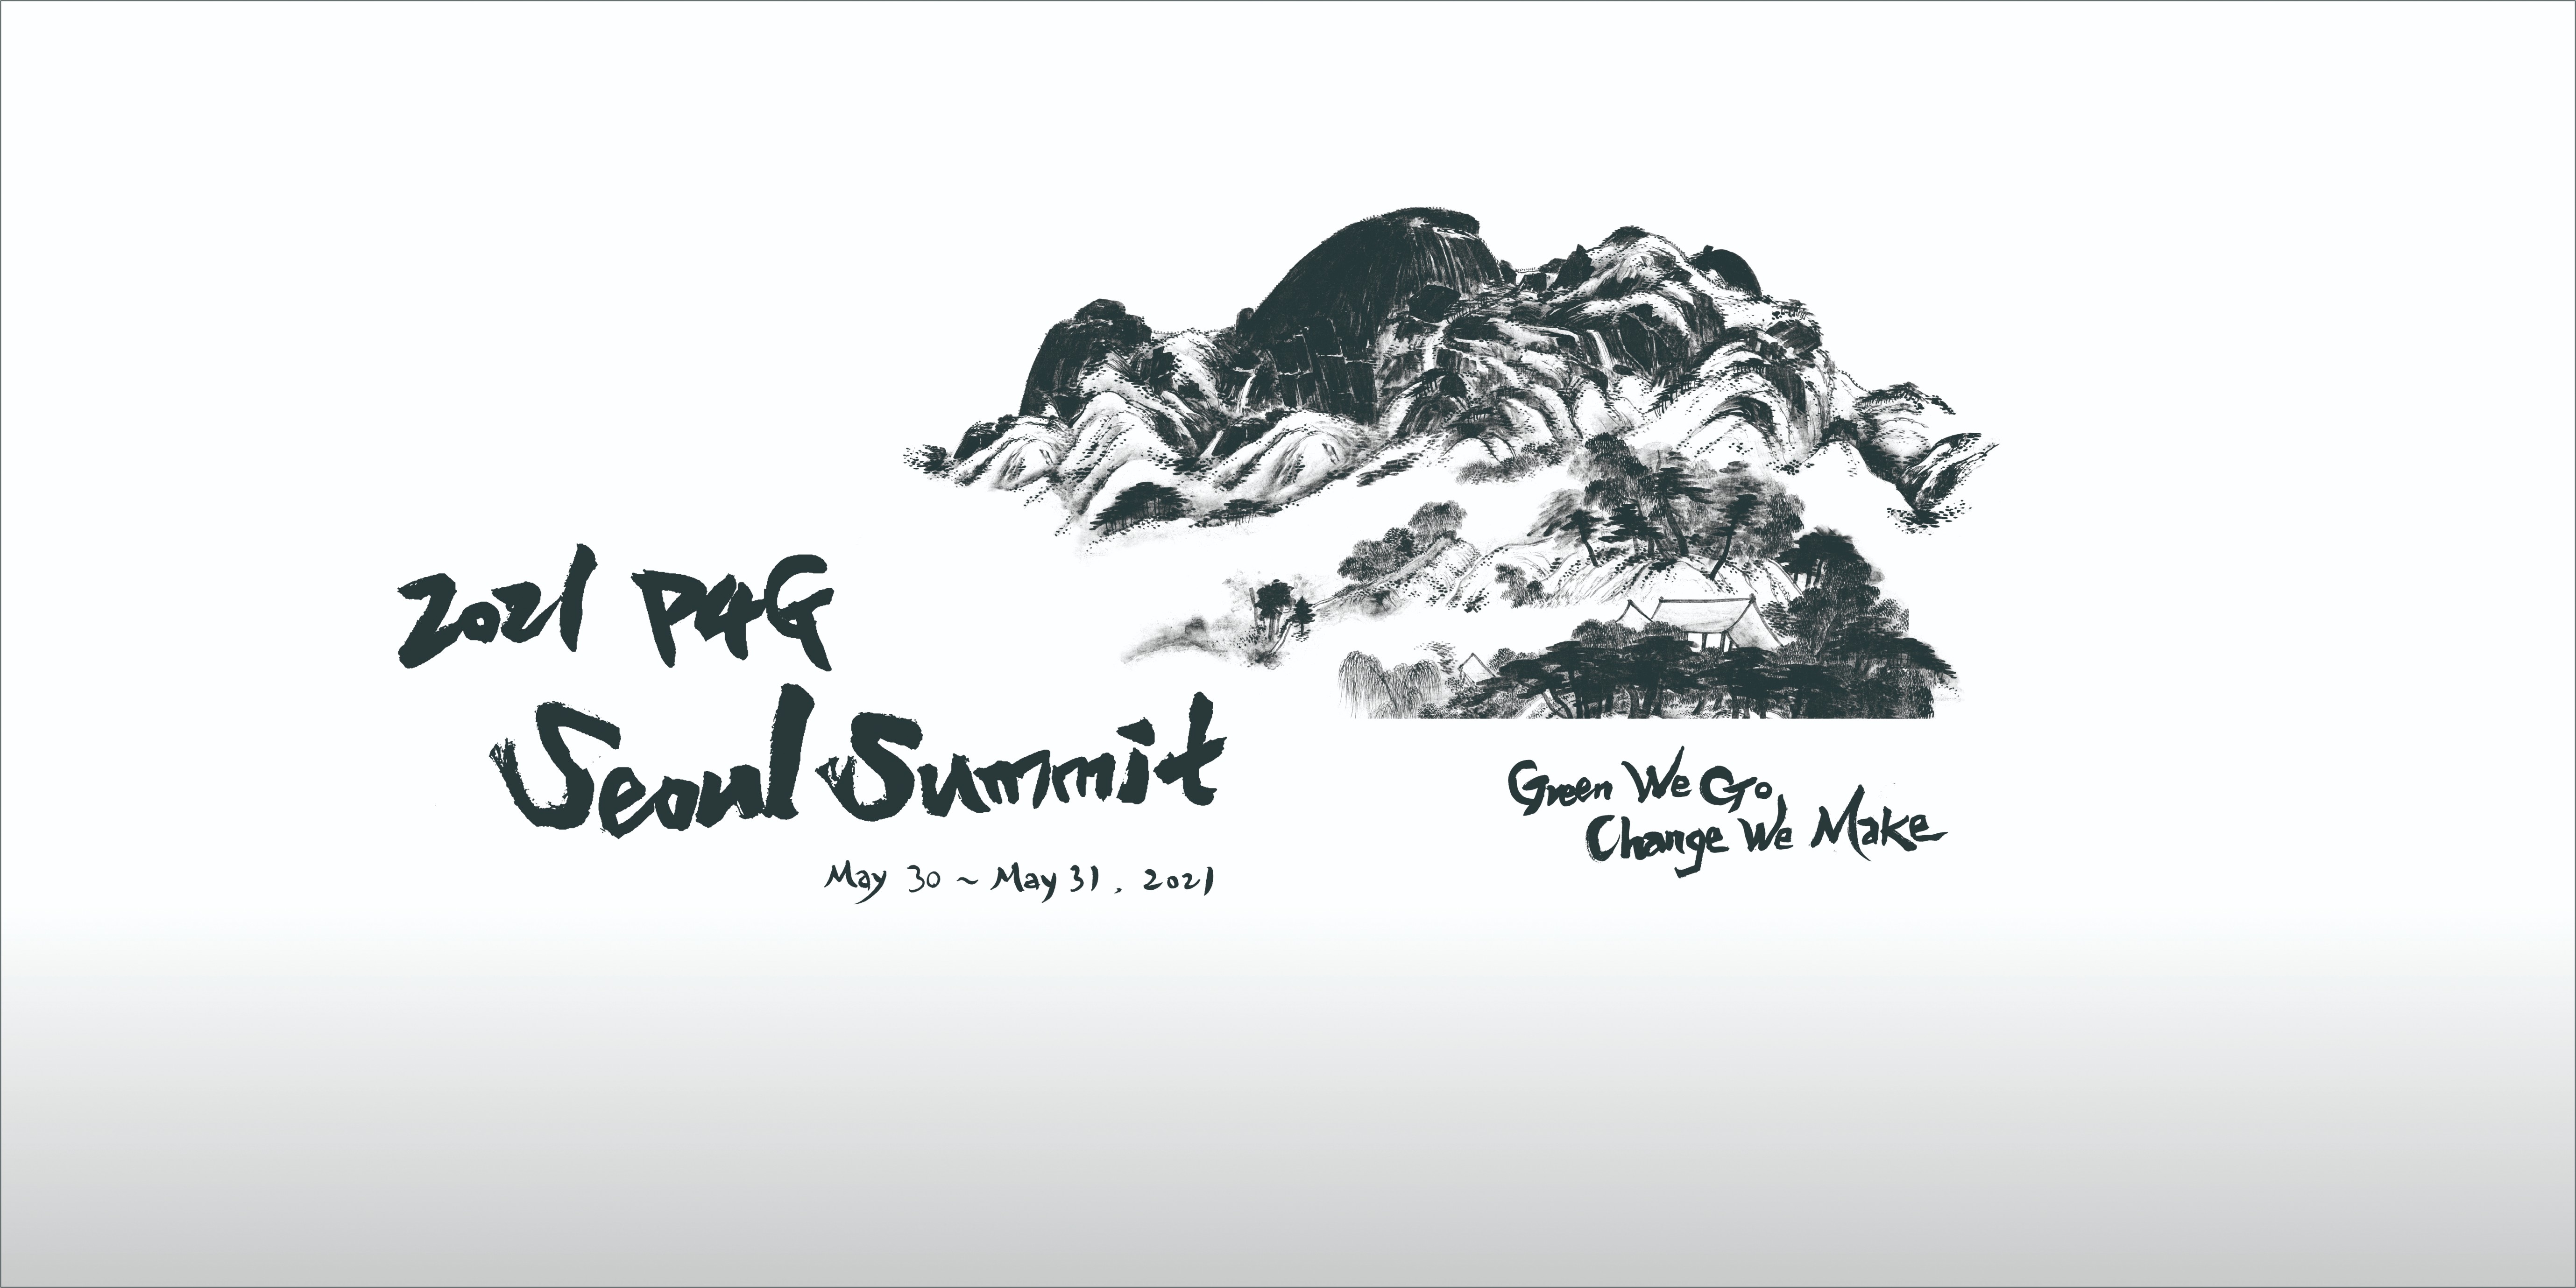 South Korea becomes host of 2021 P4G Seoul Summit this month Photo